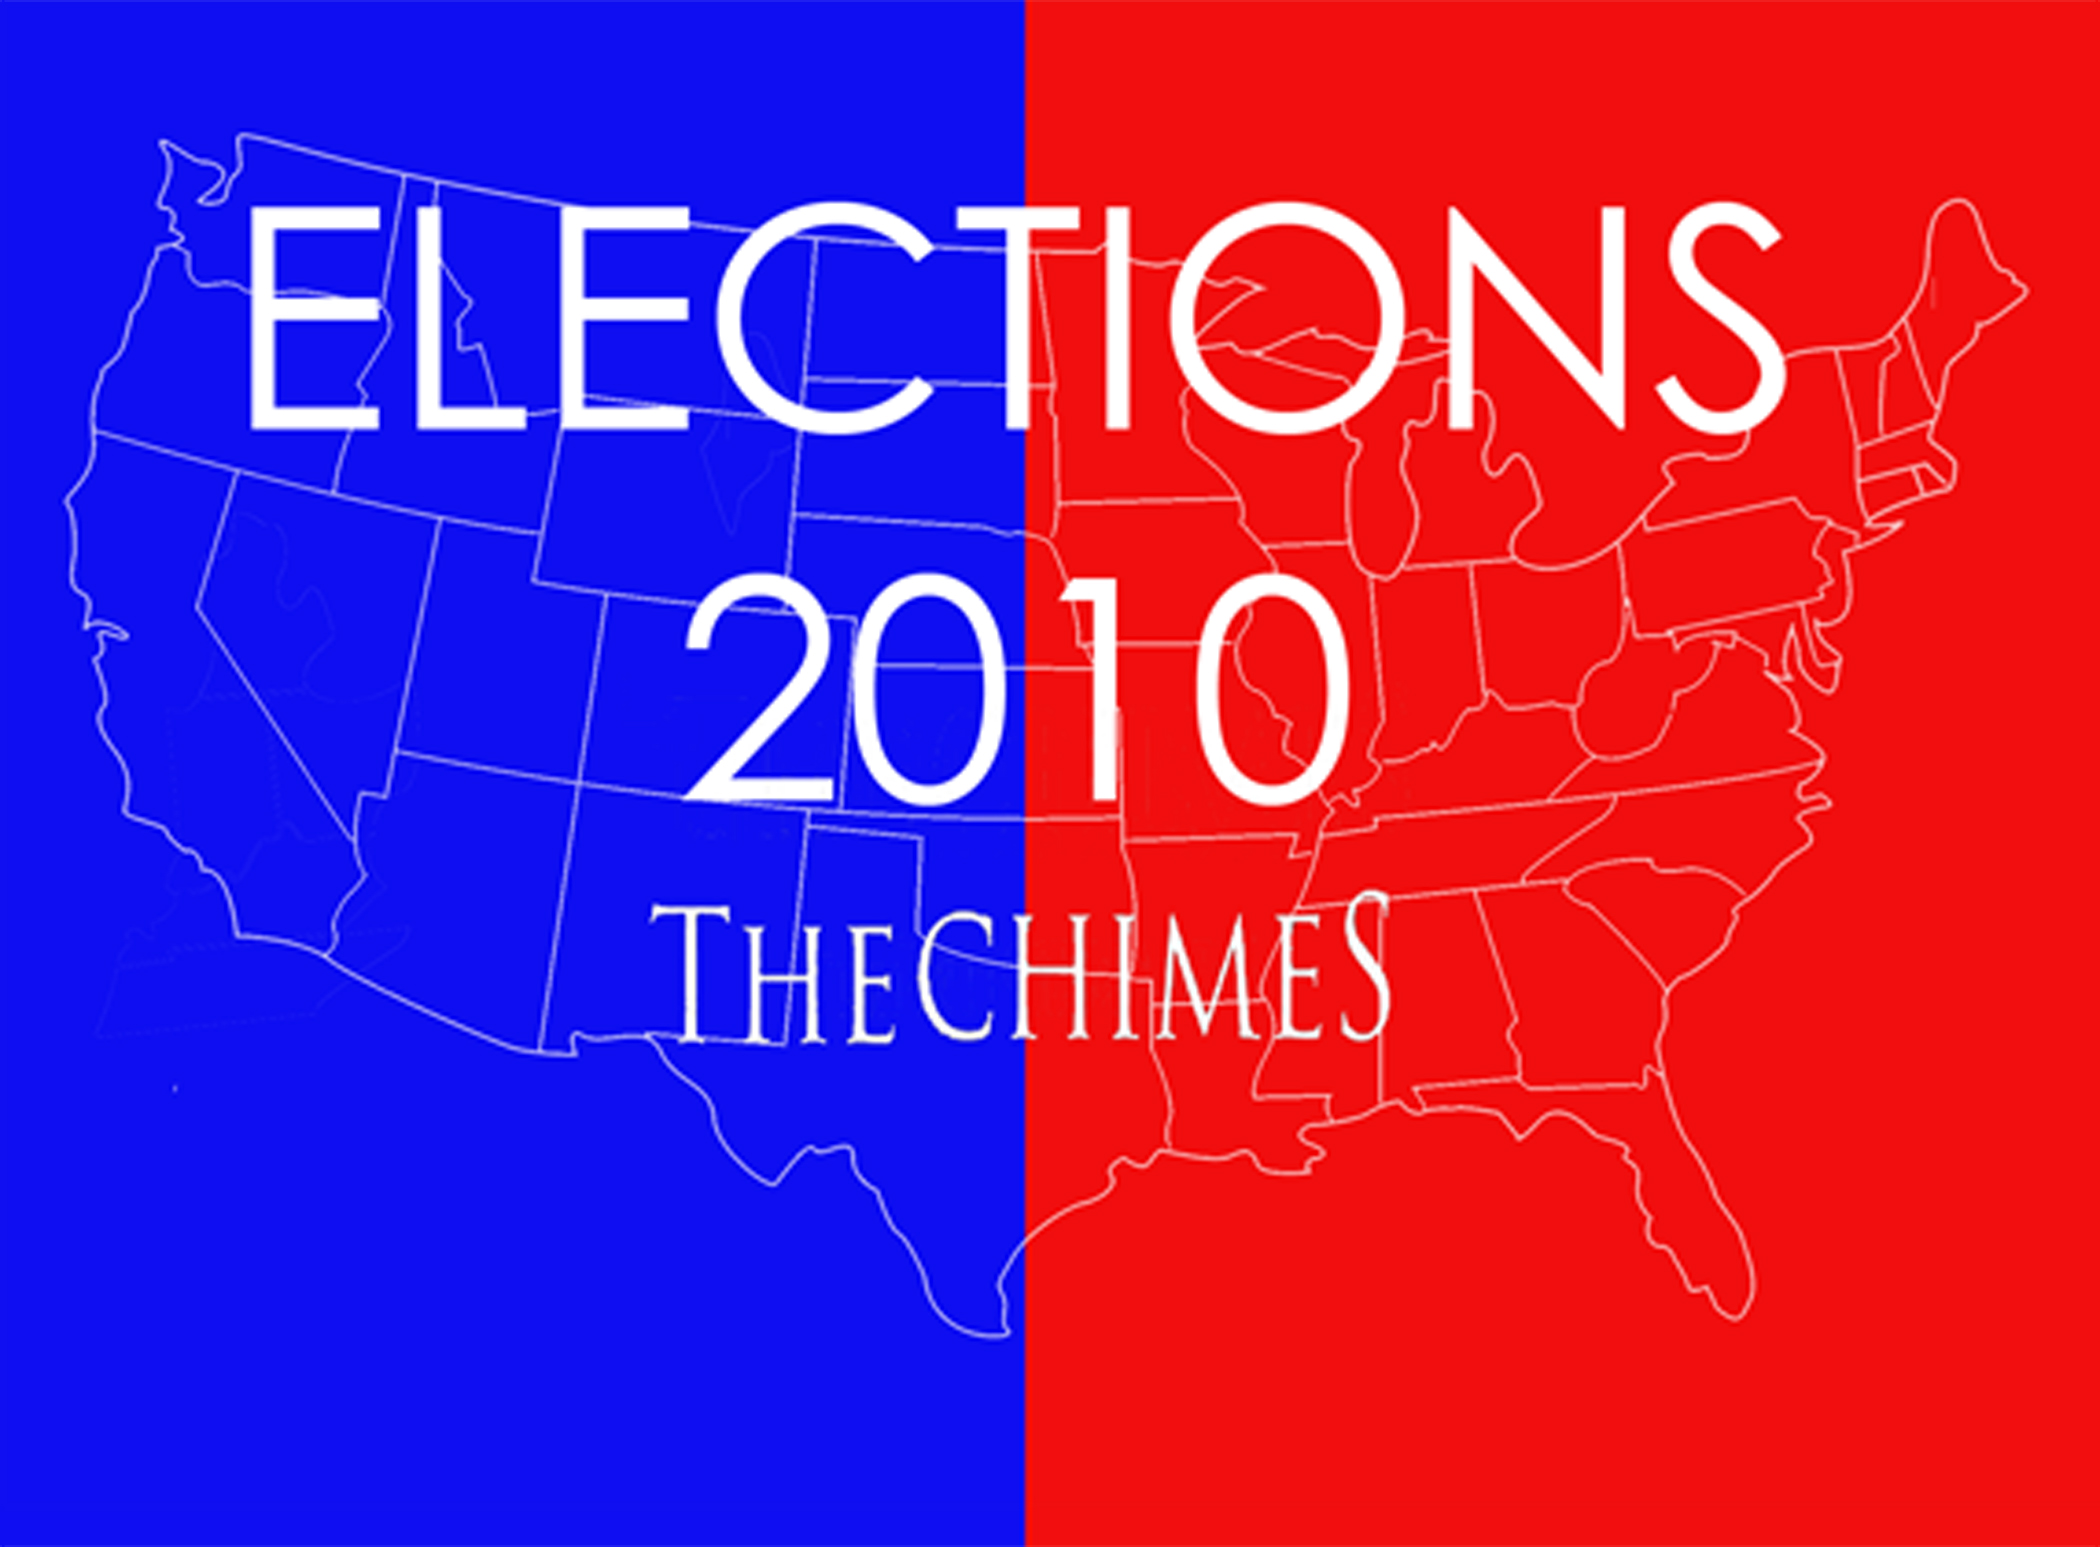 2010 election results trickling in